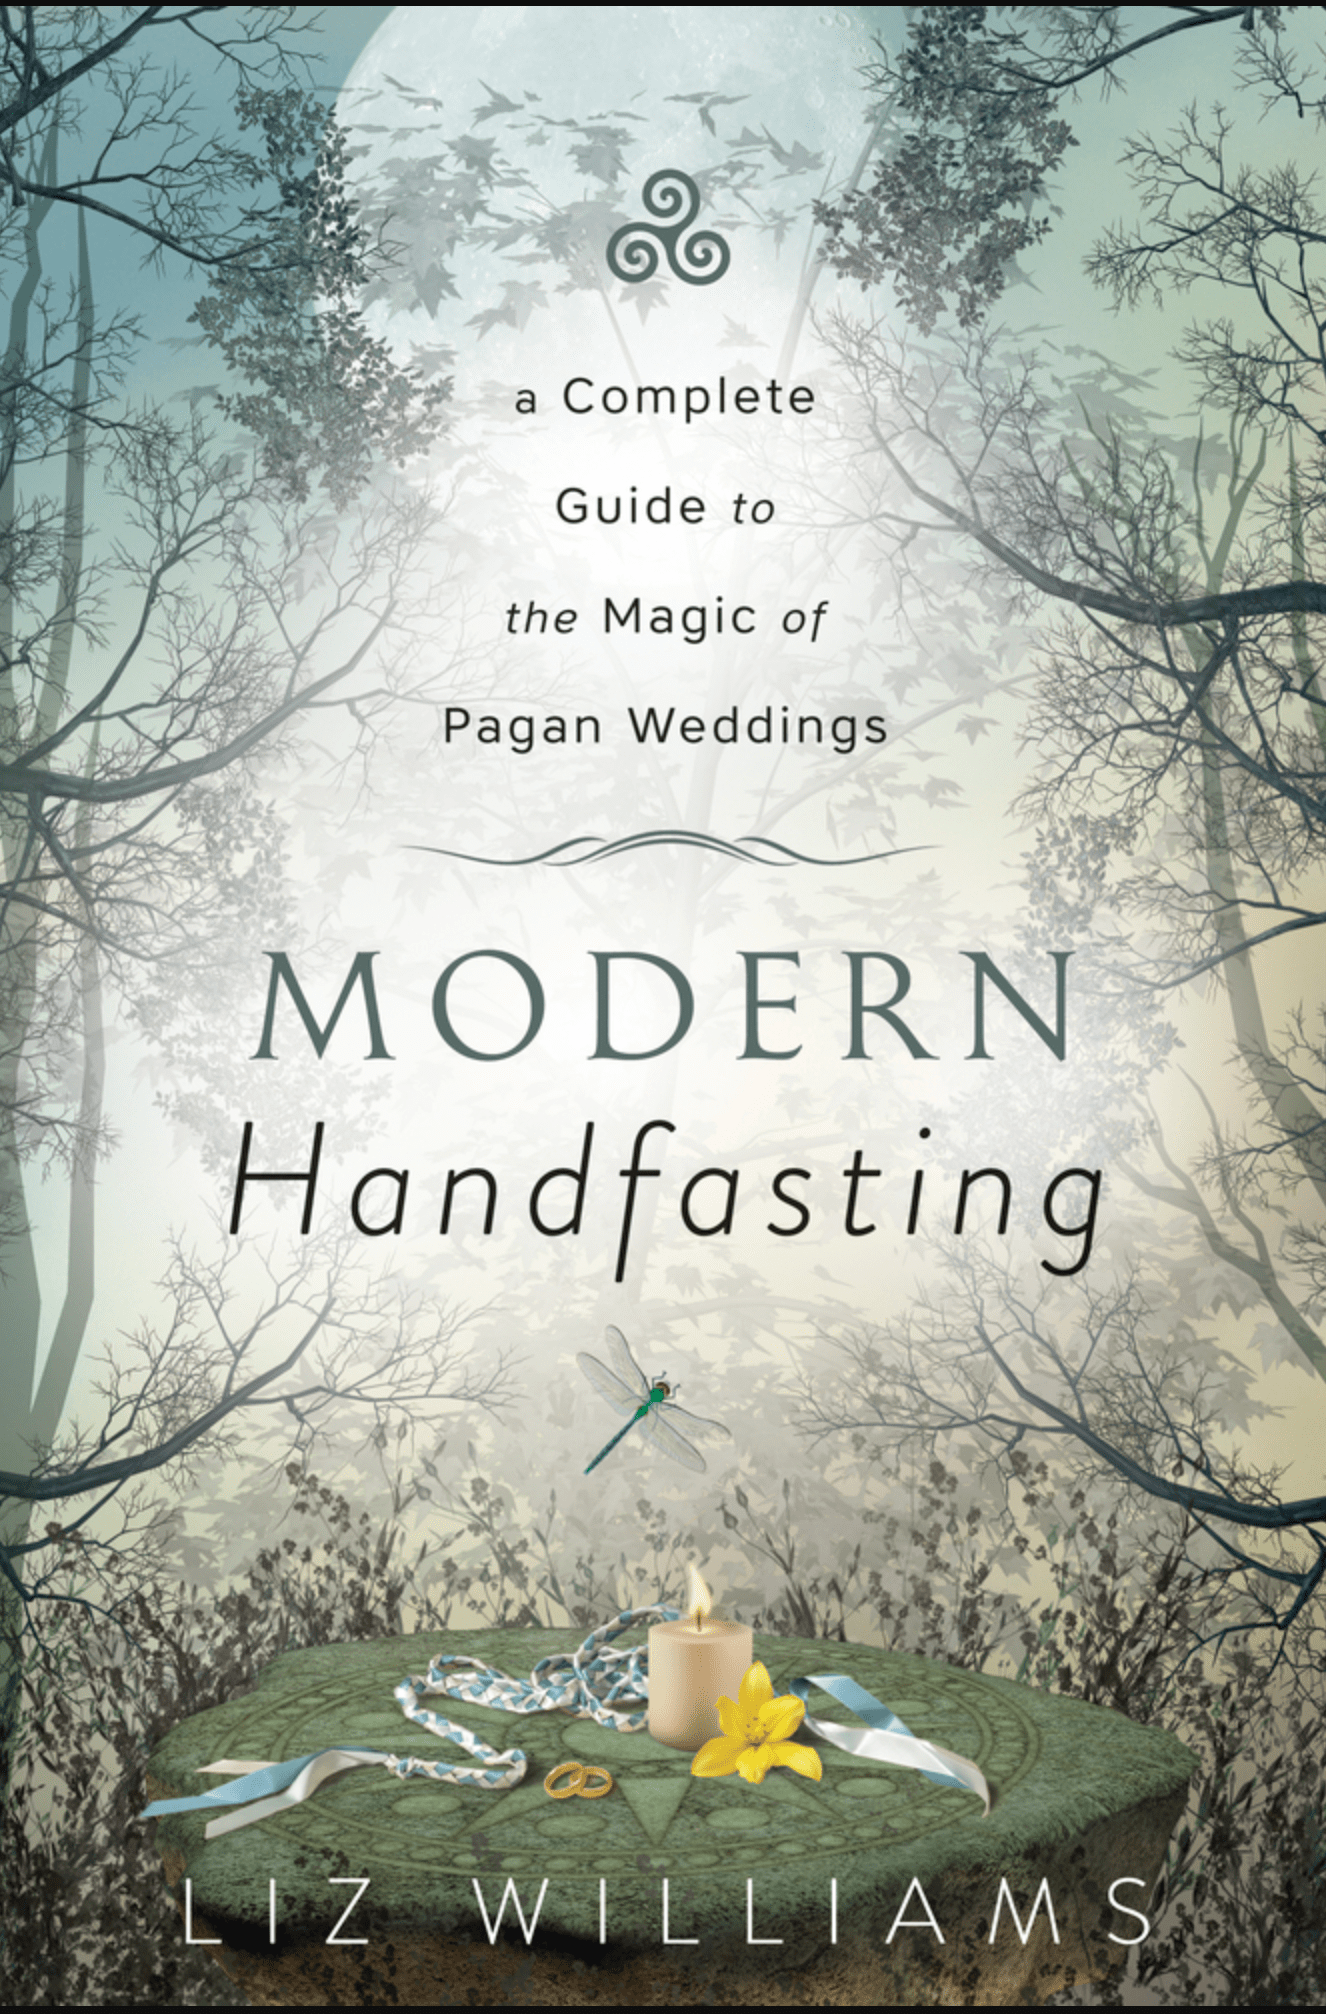 Modern Handfasting | A Complete Guide to the Magic of Pagan Wedding - Spiral Circle